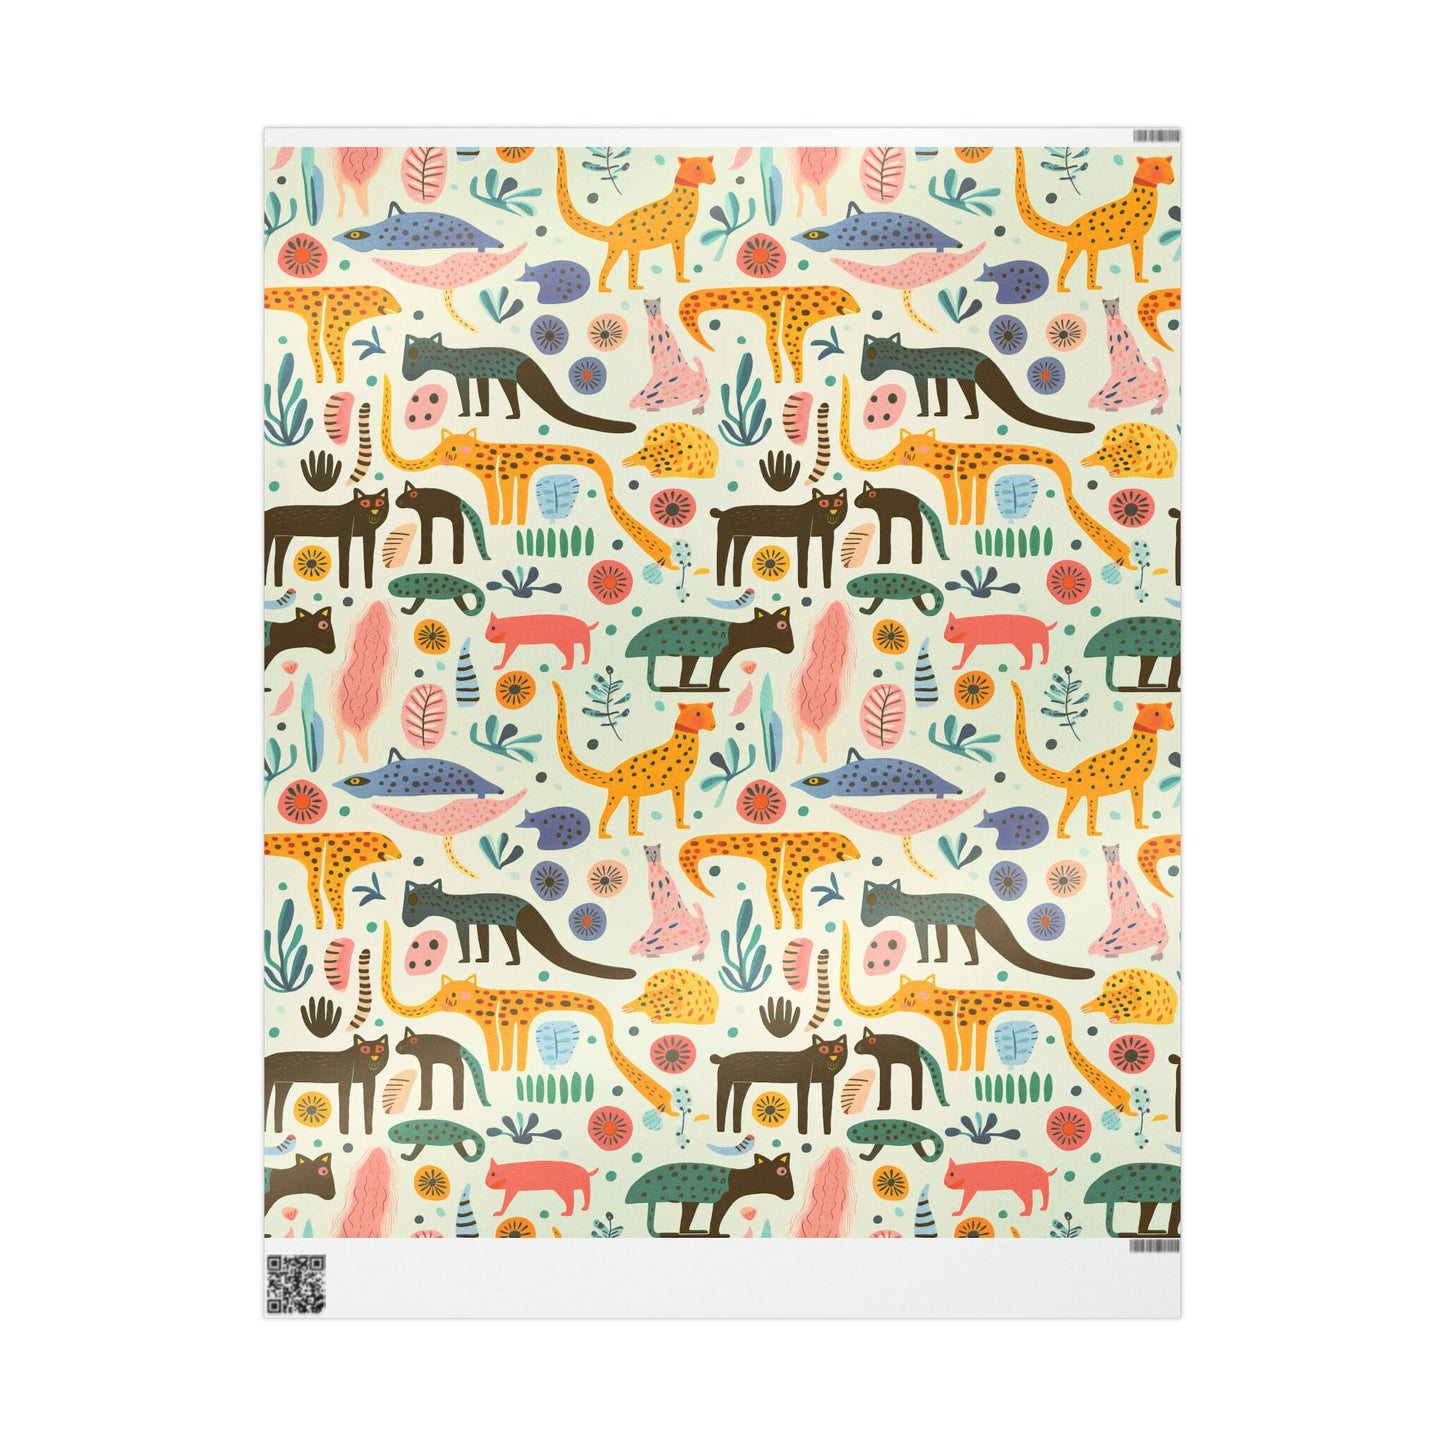 Jungle Wrap Wrapping Paper •  Fine-Art  Premium Quality Gift Wrap • Matte or Glossy Finish Options • High-Definition Jungle Print